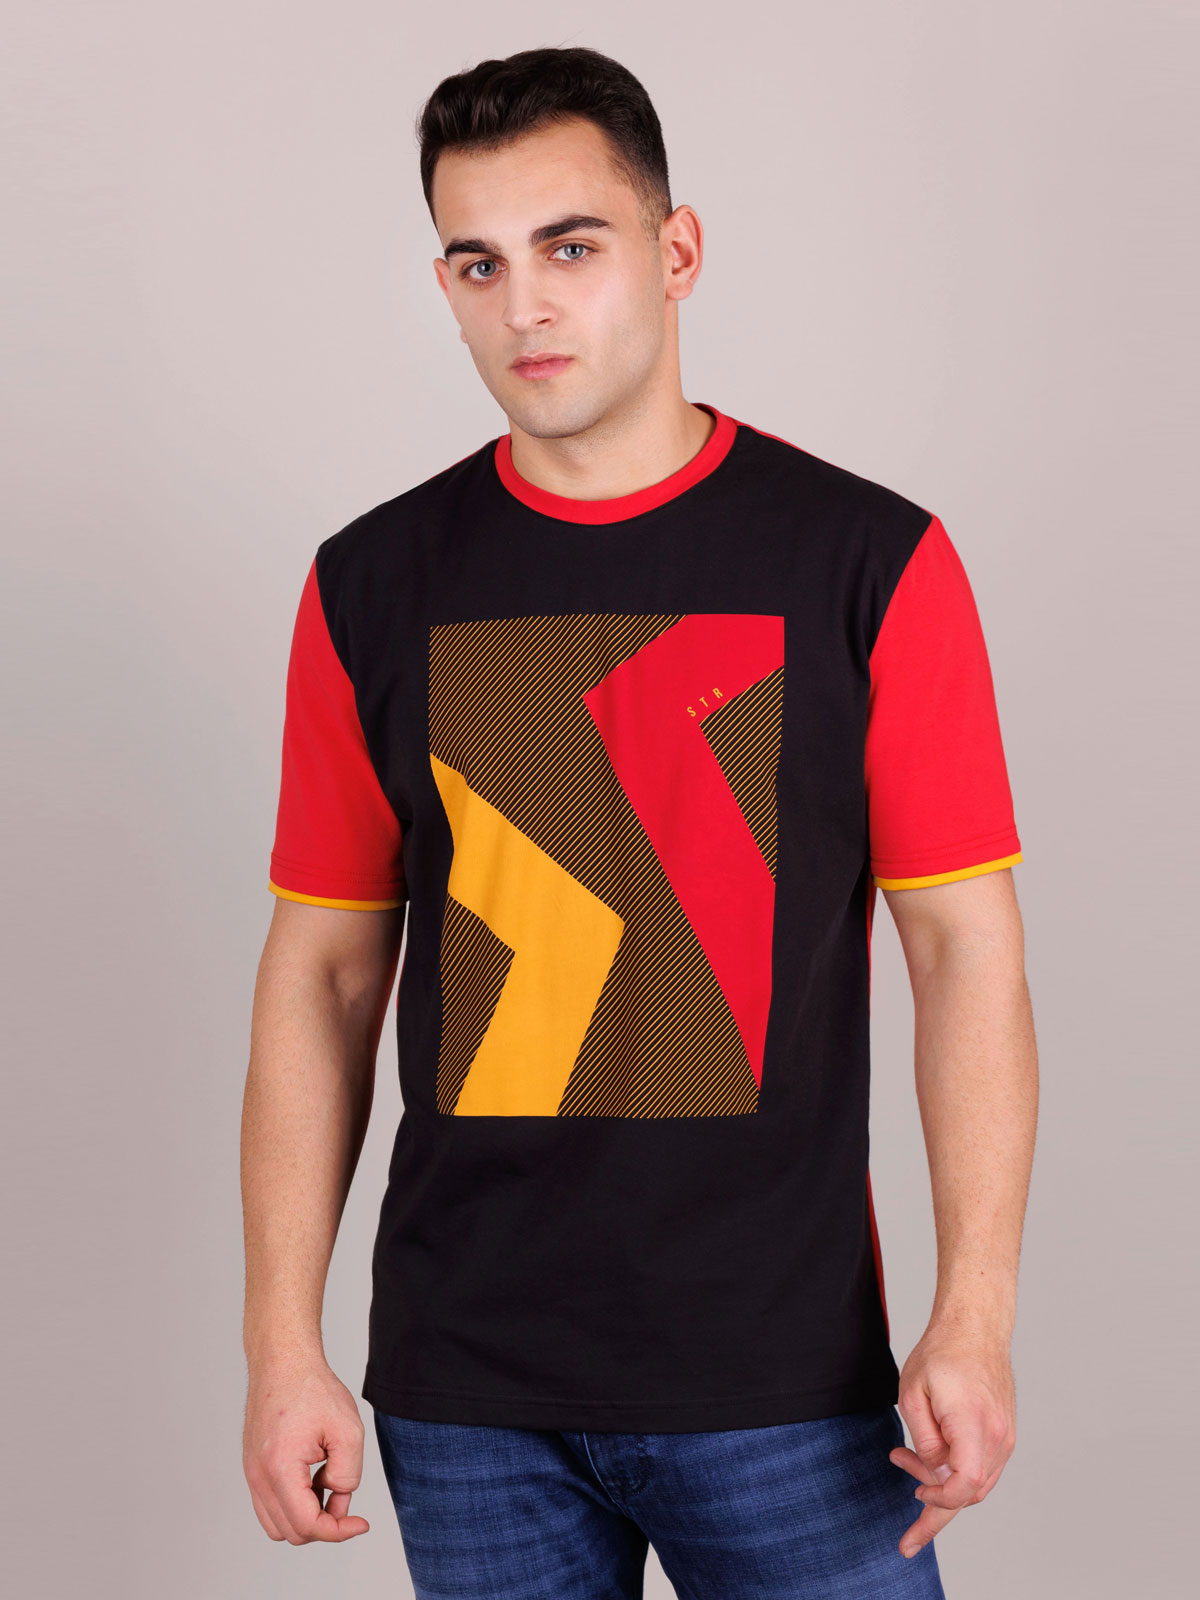 Set of tshirts in black and red - 13020 - € 44.43 img3